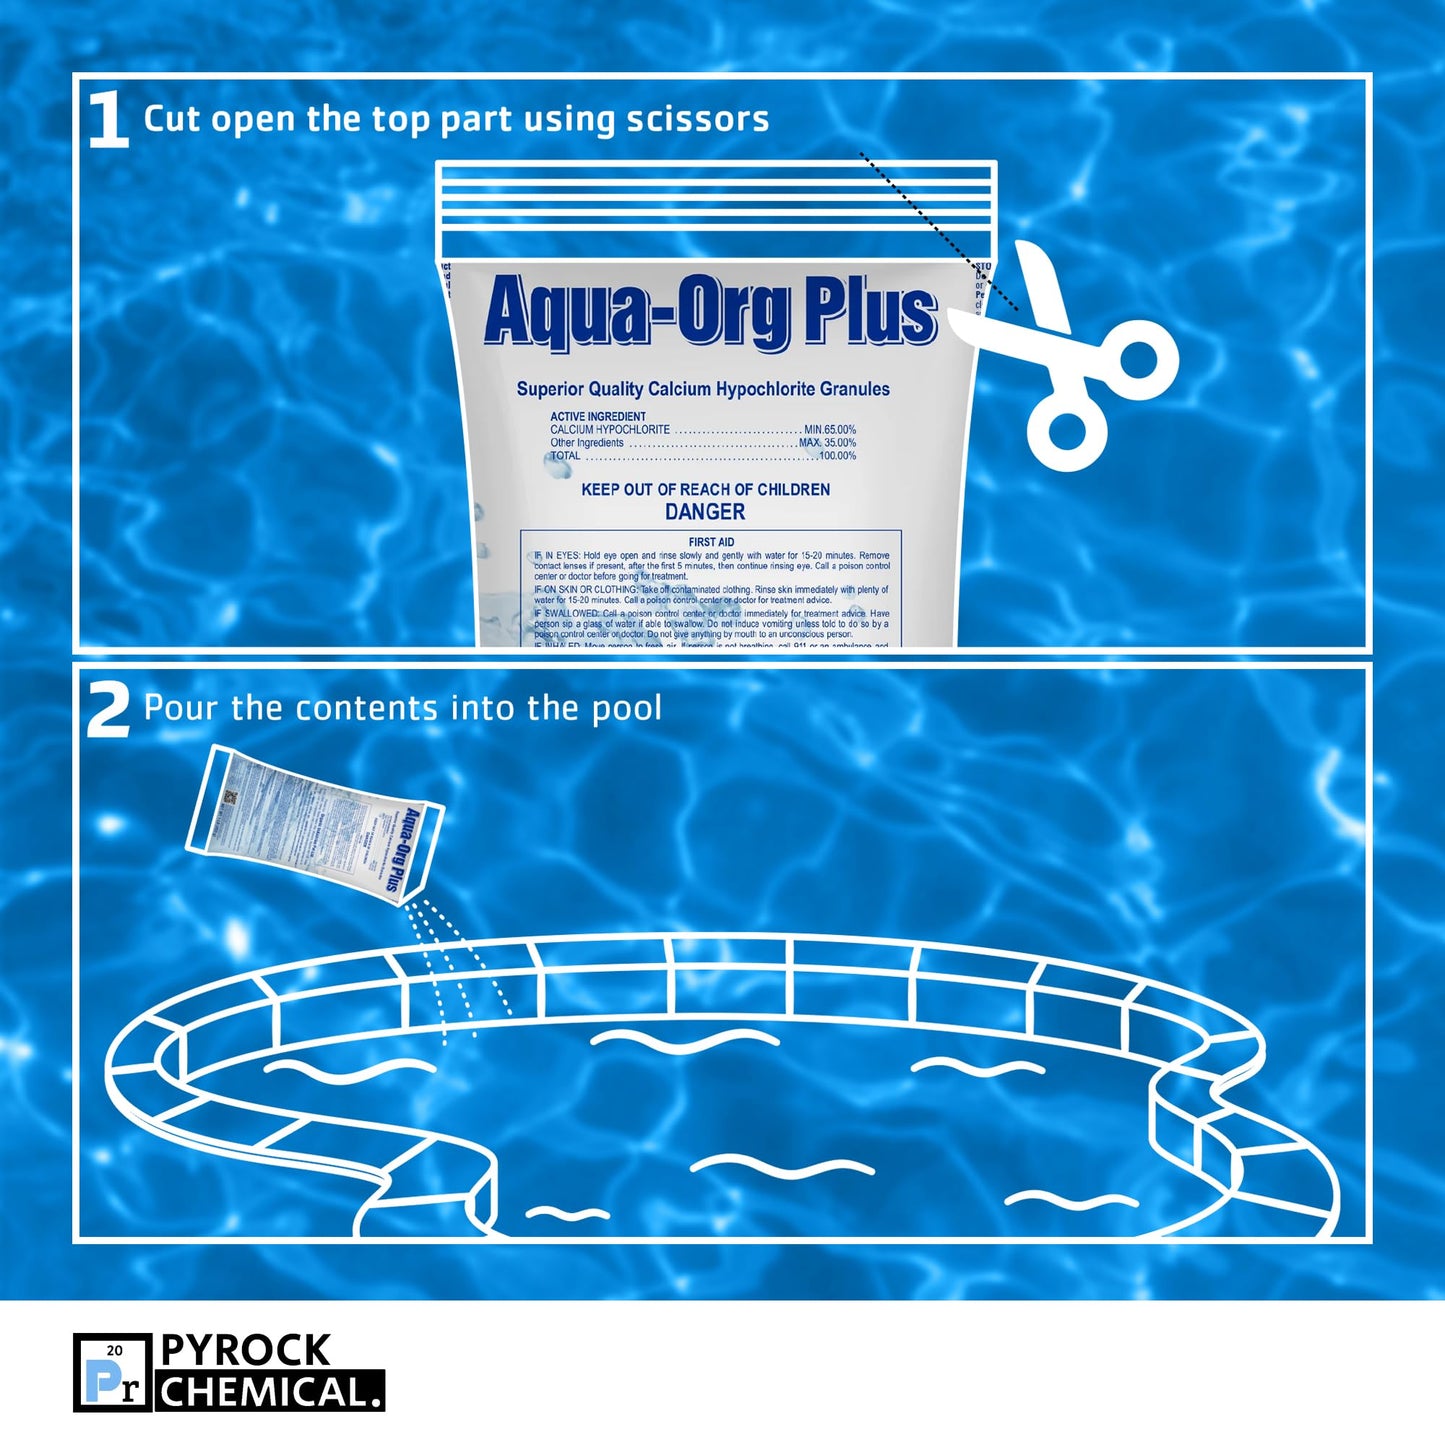 AQUA-ORG PLUS - 65% Granular Calcium Hypochlorite (Shock) - Swimming Pool Shock for In-Ground, Above Ground, Spas & Hot Tubs - 24-Pack of 1 Pound Bags